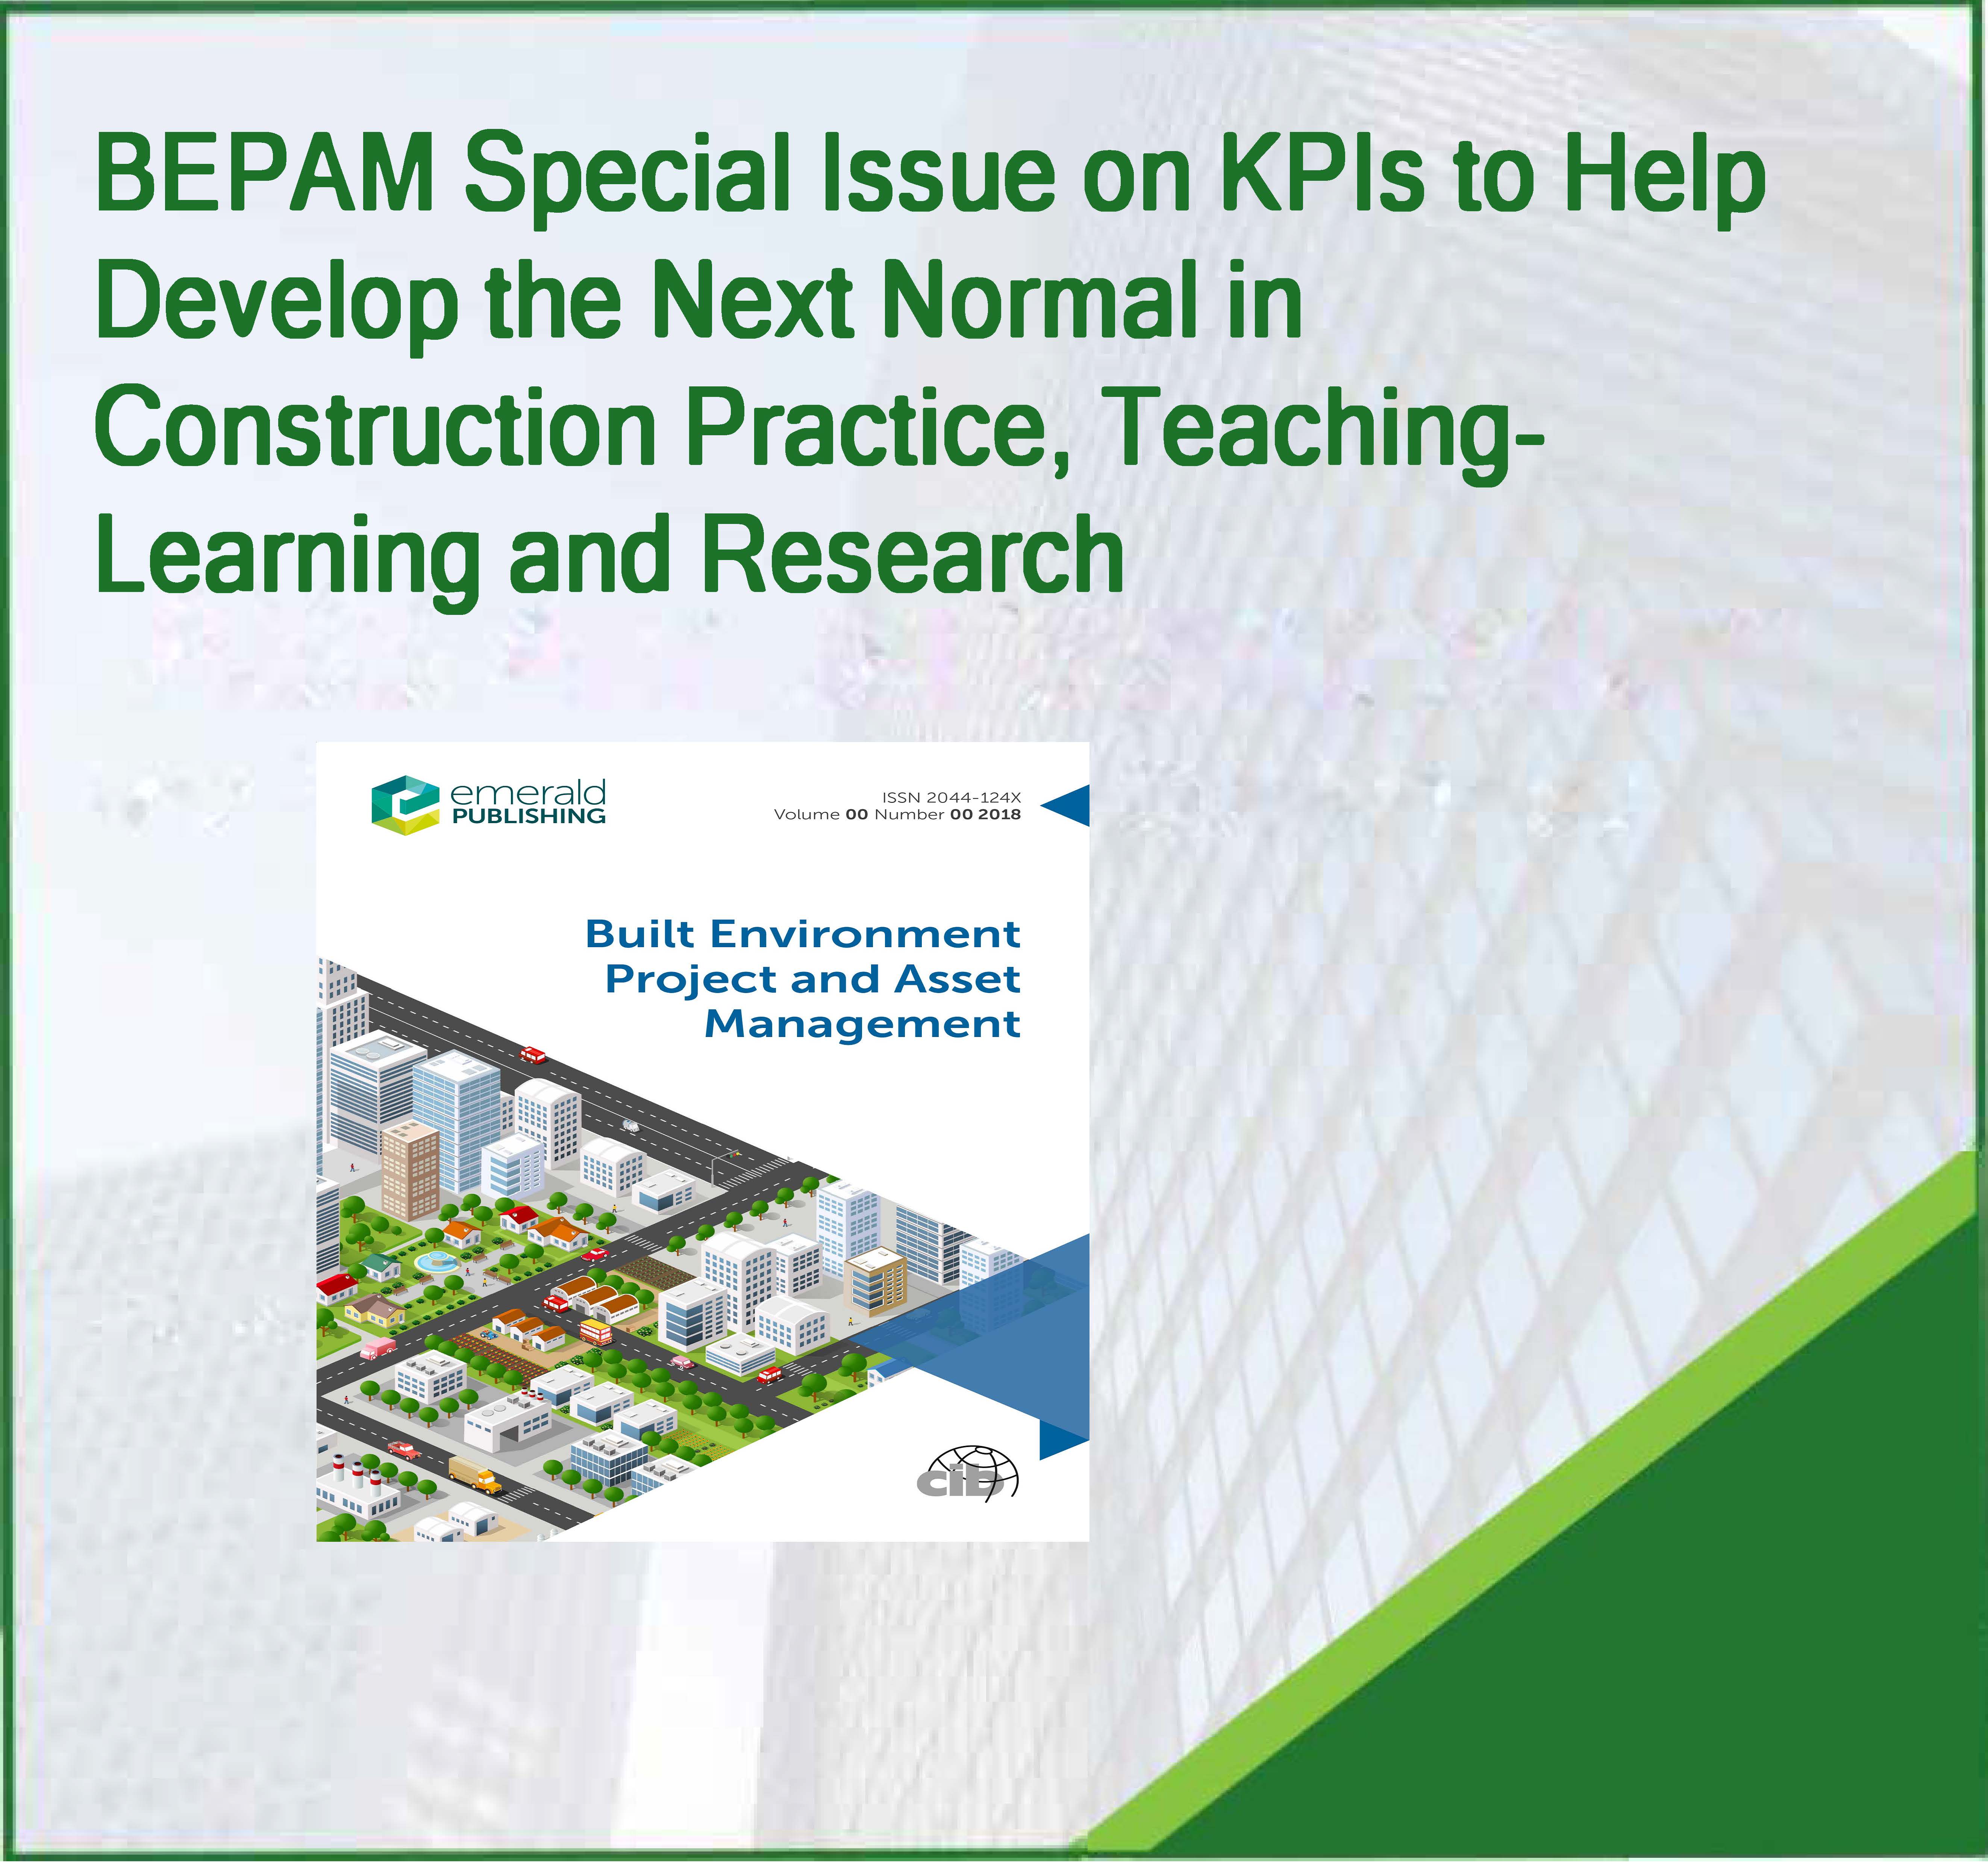 BEPAM Special Issue on KPIs to Help Develop the Next Normal in Construction Practice, Teaching-Learning and Research